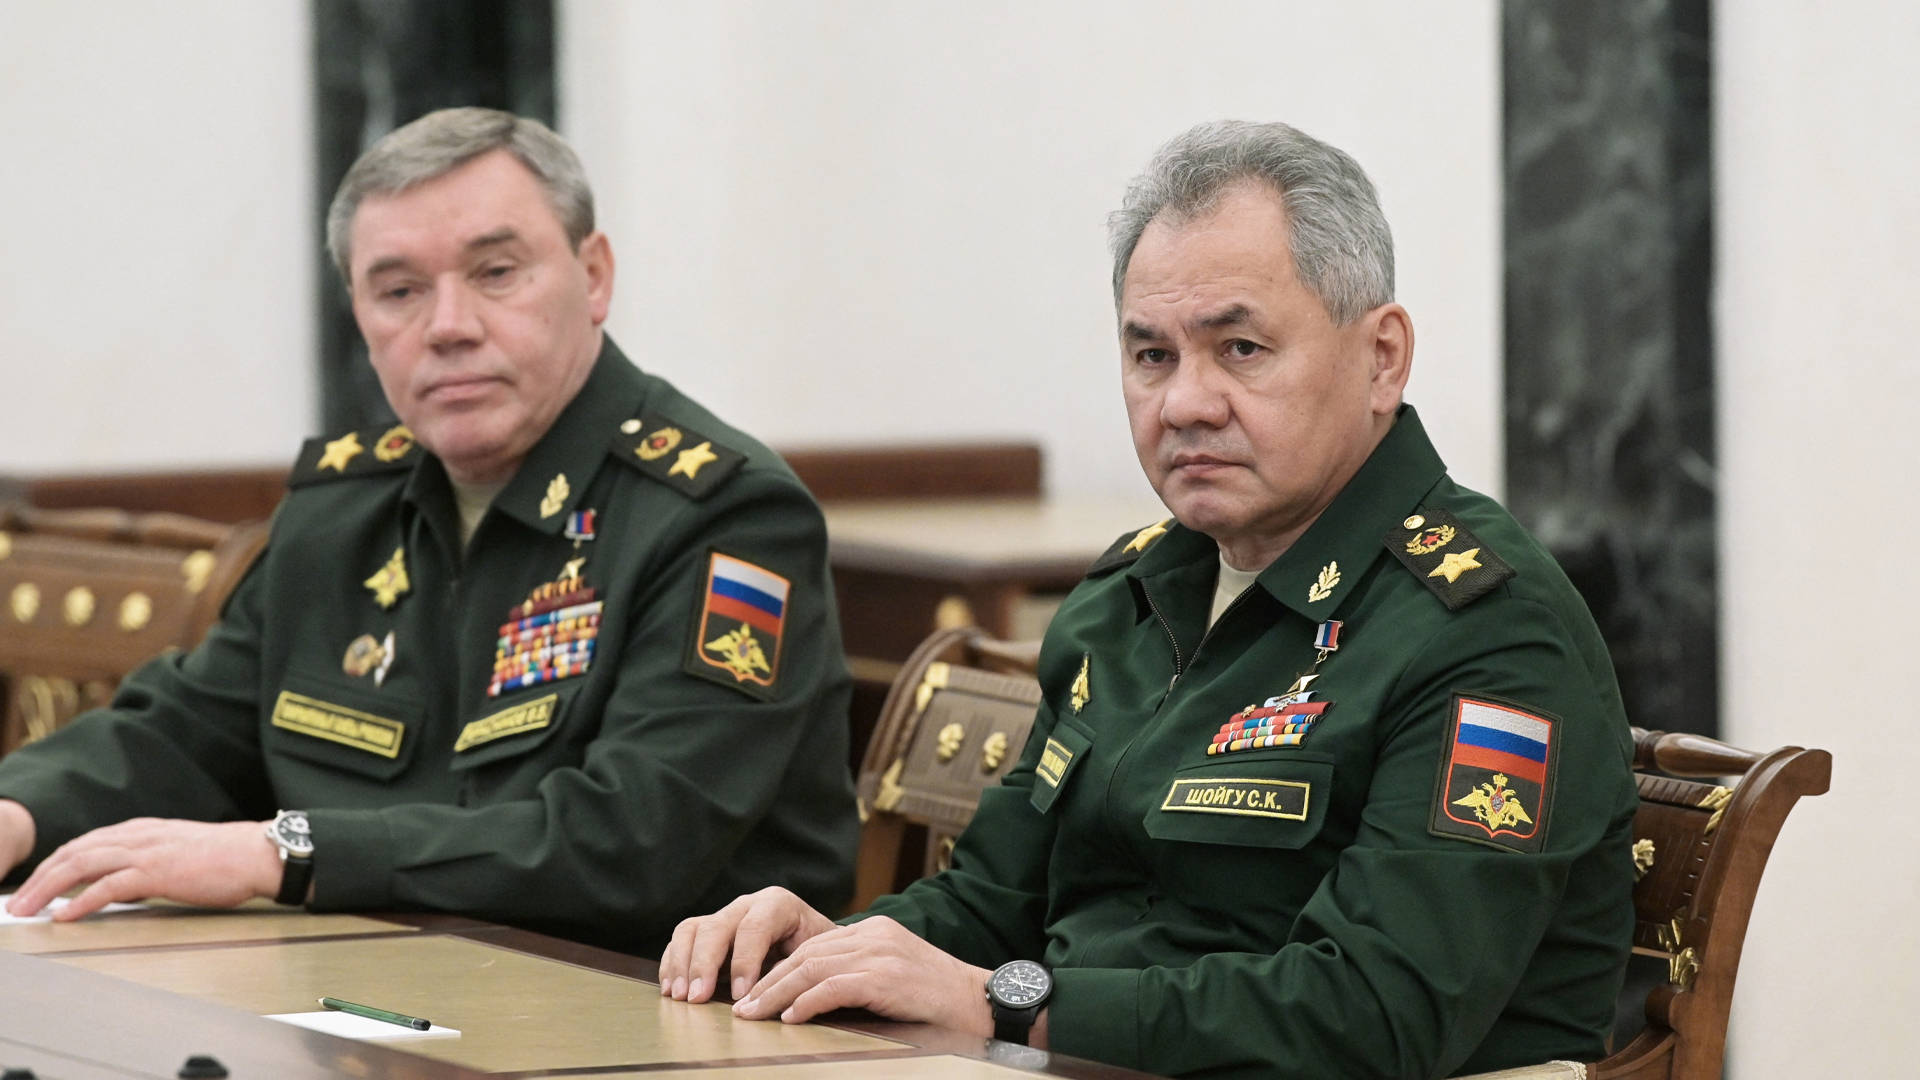 A theory developed by General Valery Gerasimov expands the scenario of armed conflict and calls it a gray zone.  He explains that this area involves more than war.  Its aims are social, economic, humanitarian and political.  General Gerasimov at left of photo (Reuters)